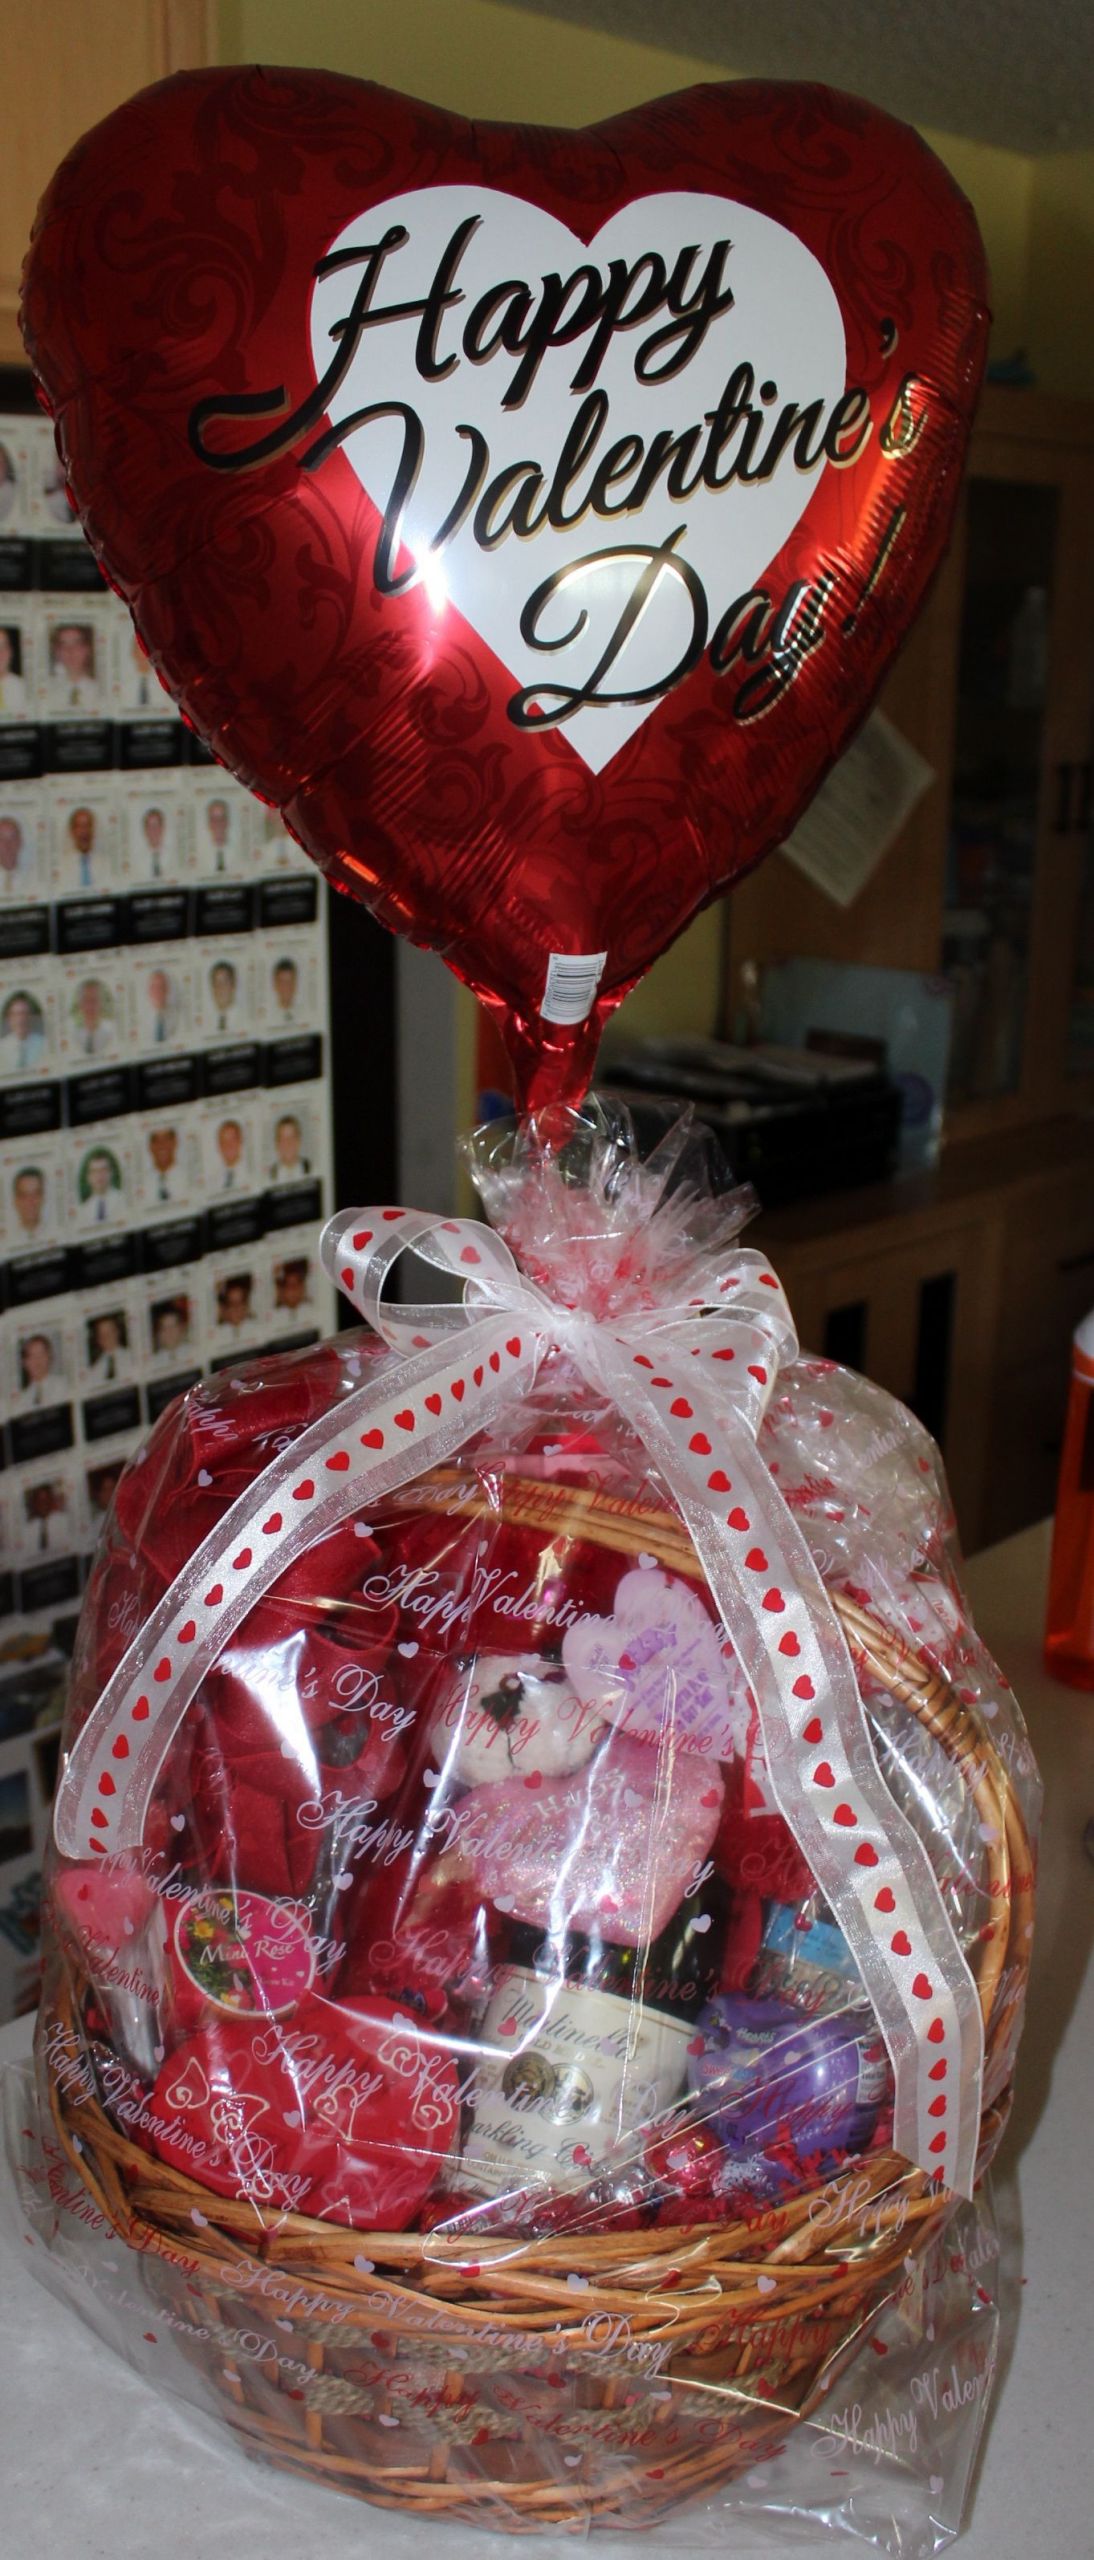 Best Valentines Gift Ideas For Her
 47 How To Make A Valentine Gift Basket For Her Best Idea